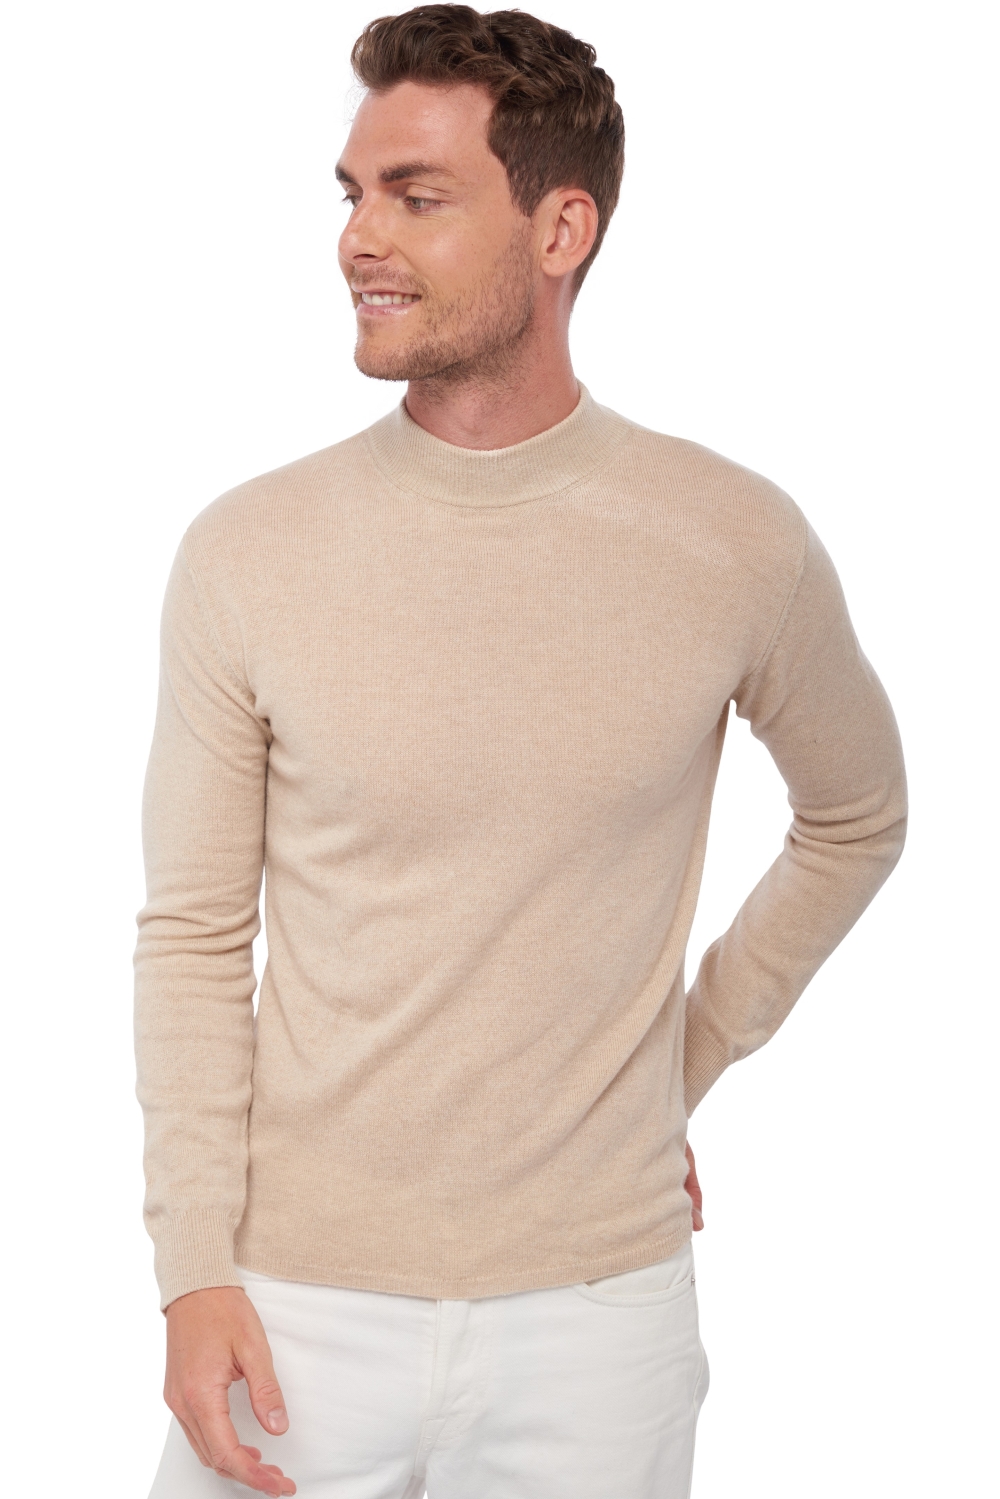 Cachemire pull homme col roule frederic natural beige s